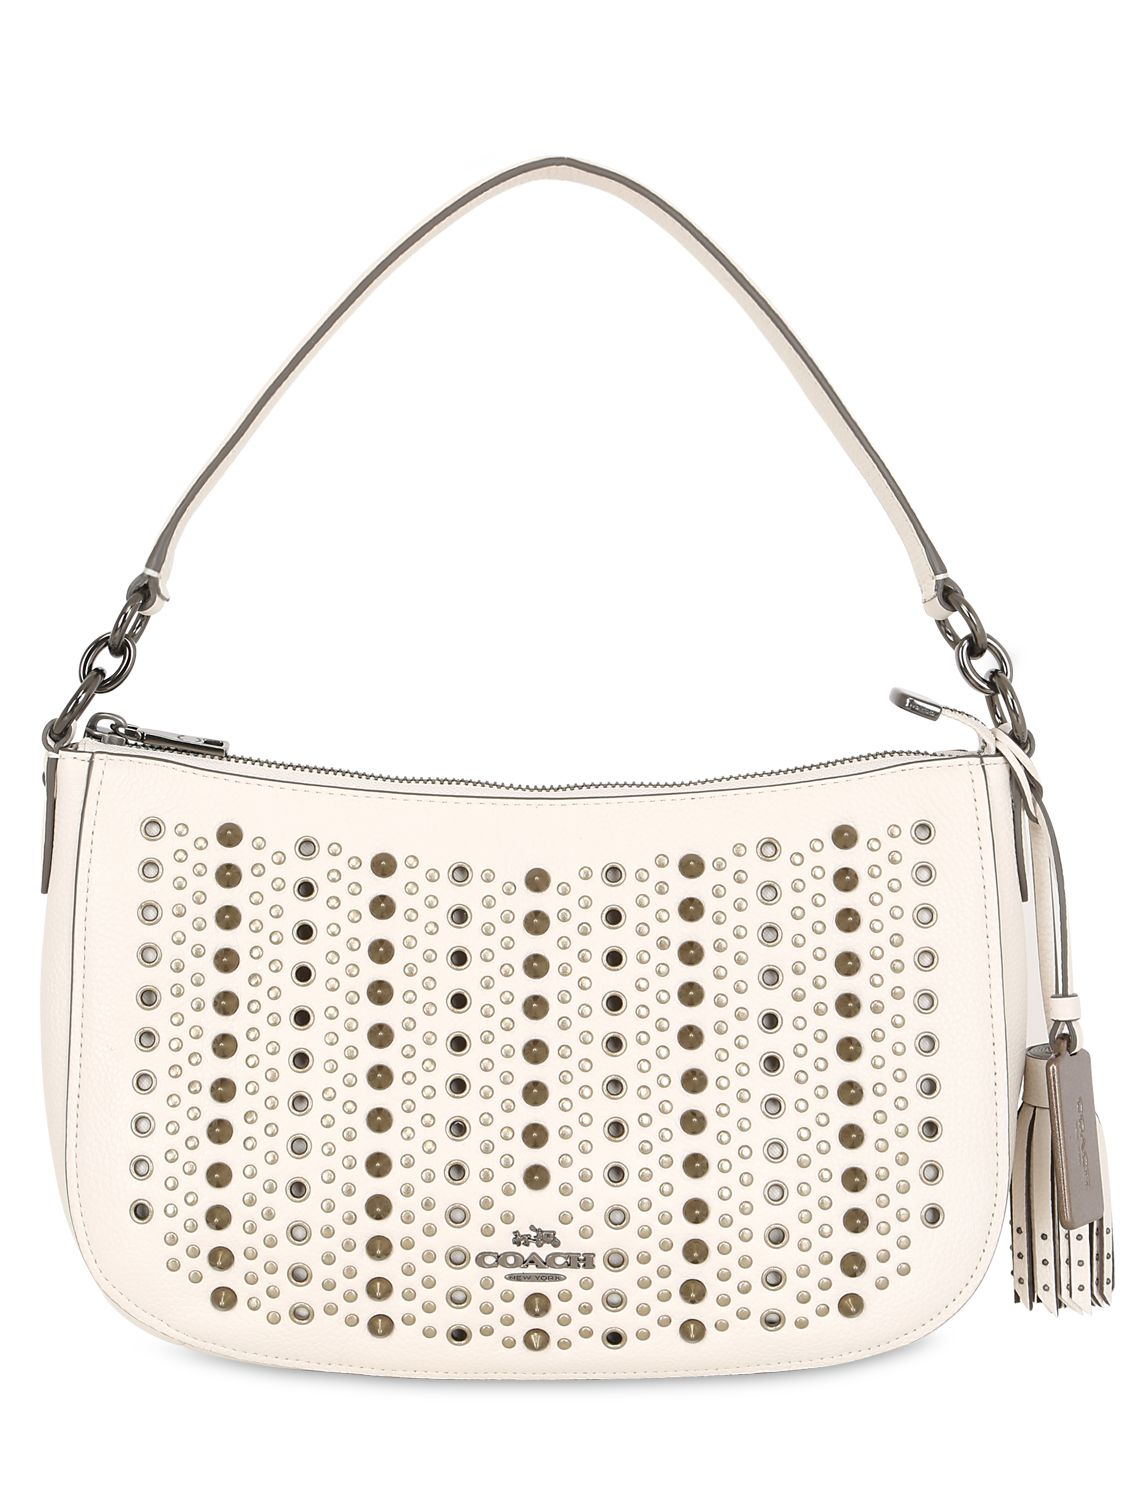 Coach Chelsea Studded Leather Shoulder Bag in White (OFF WHITE) | Lyst